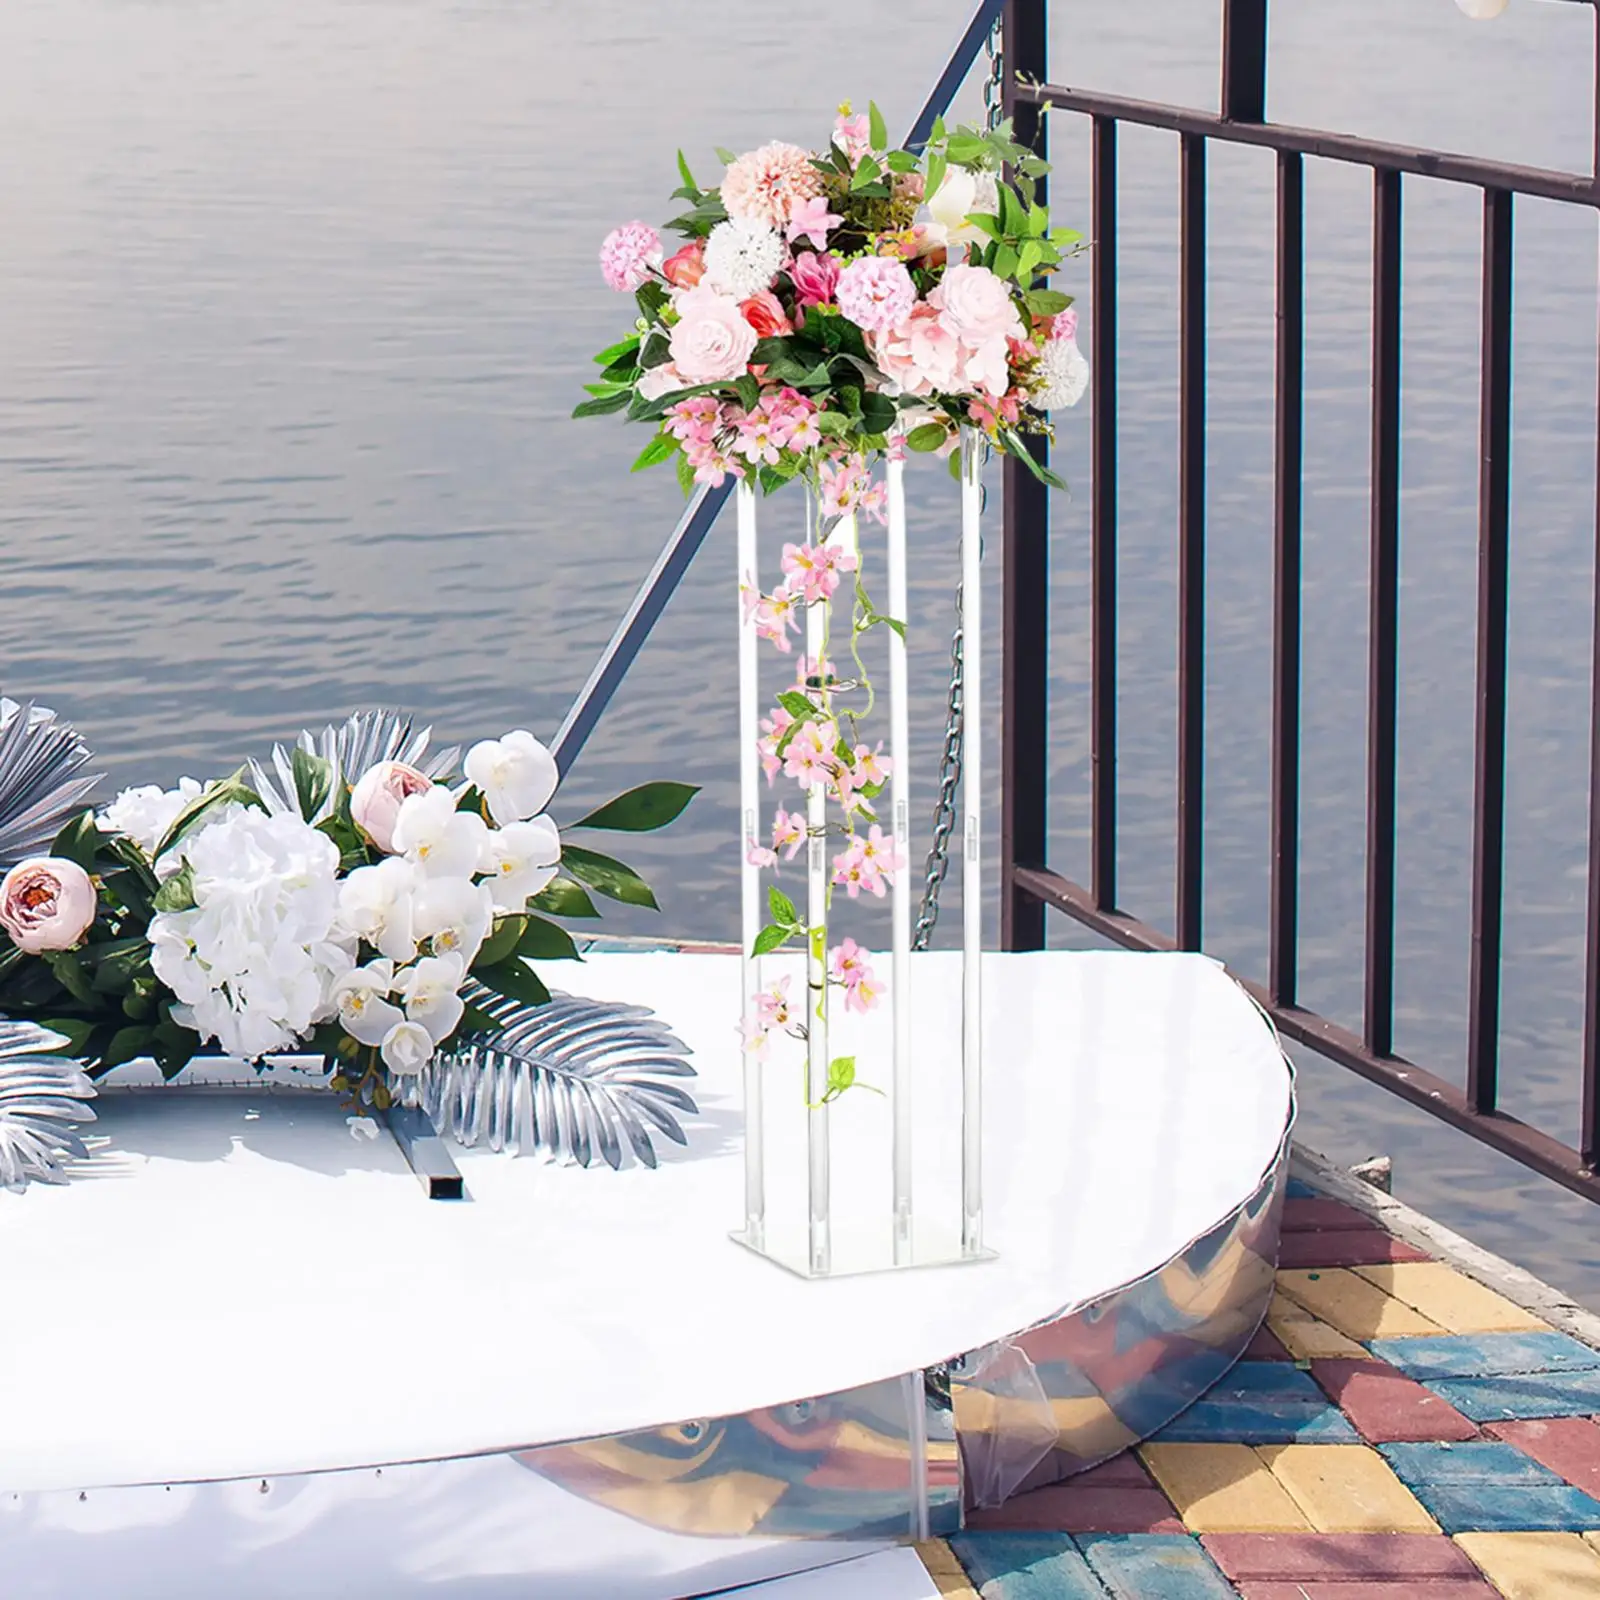 Acrylic Vase Wedding Centerpieces Geometric Display Stands Decorative Modern Clear Tall Flower Vases for Party Table Decoration